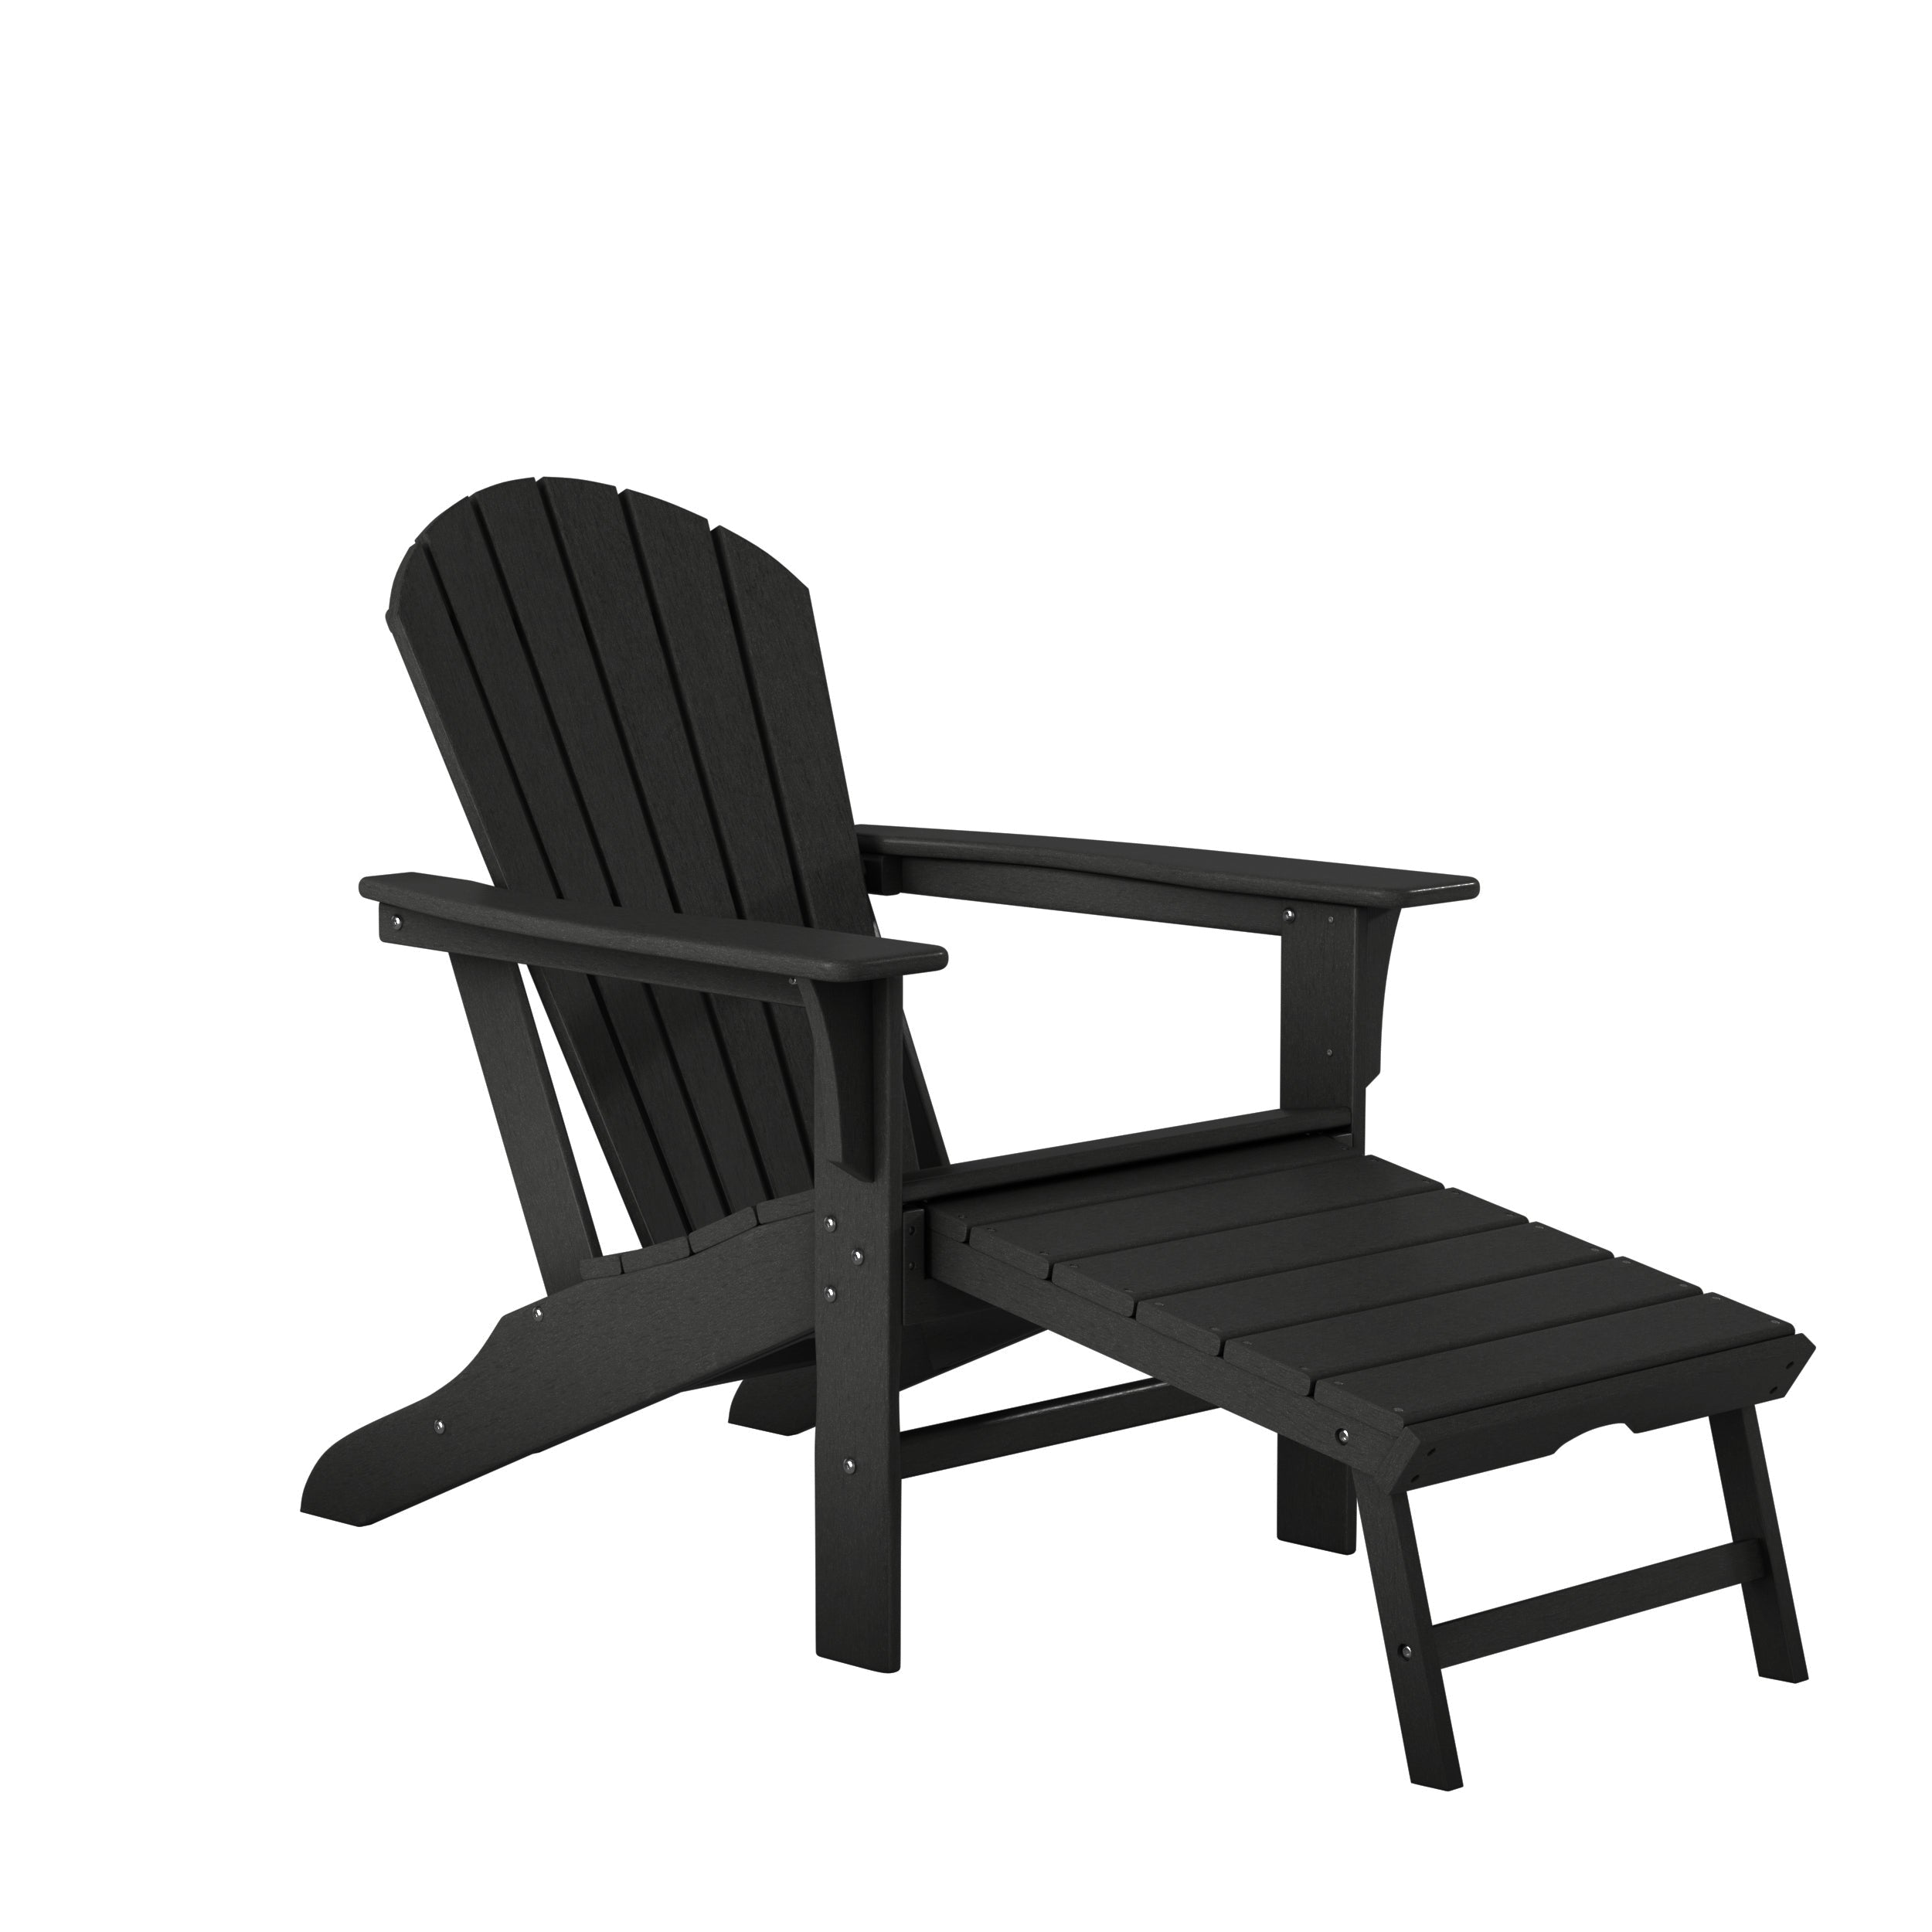 LuXeo Hampton HDPE Adirondack Chair with Hideaway Ottoman and Table Set (3-PIece)